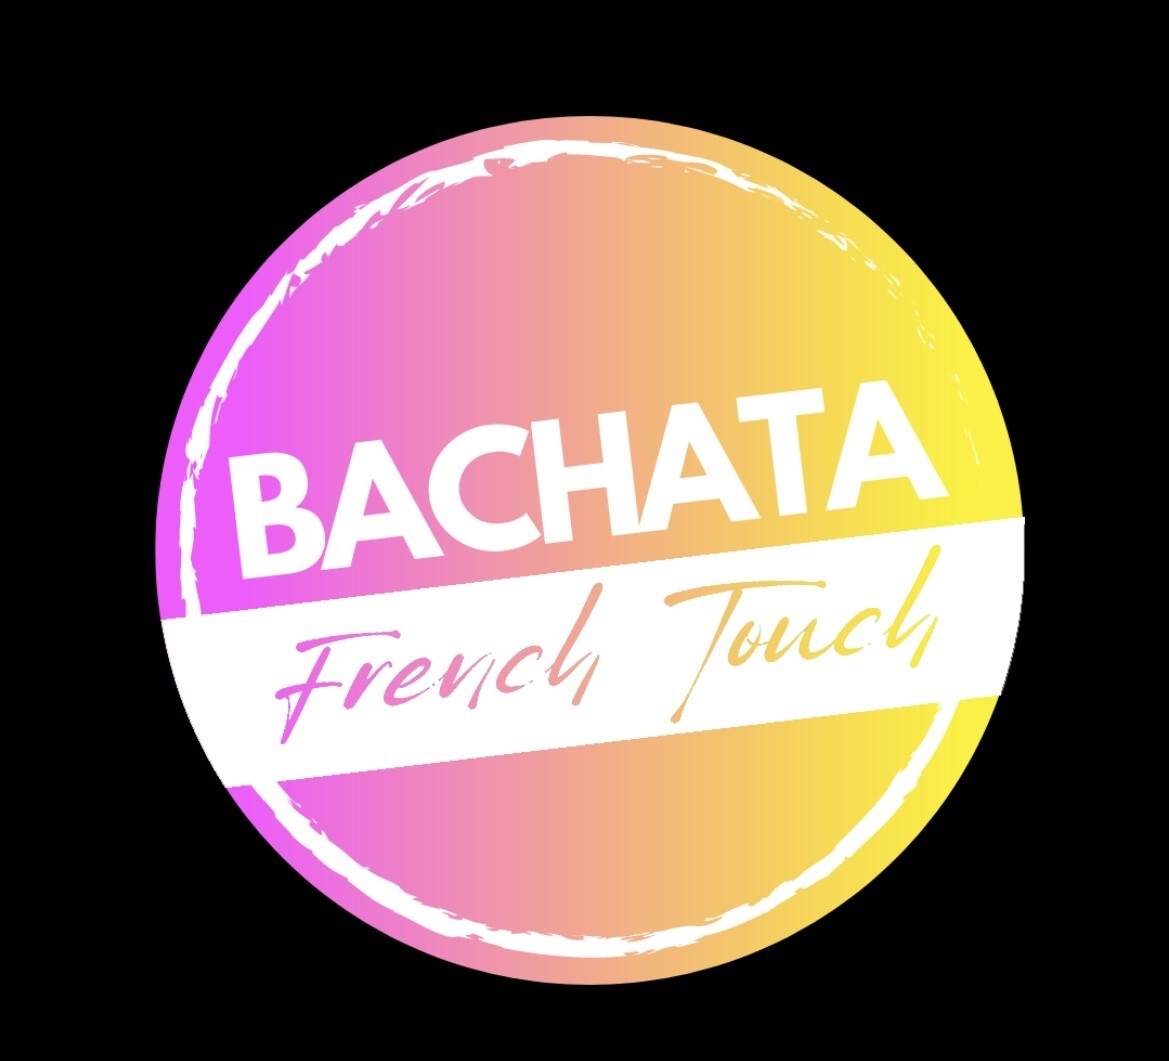 BACHATA FRENCH TOUCH